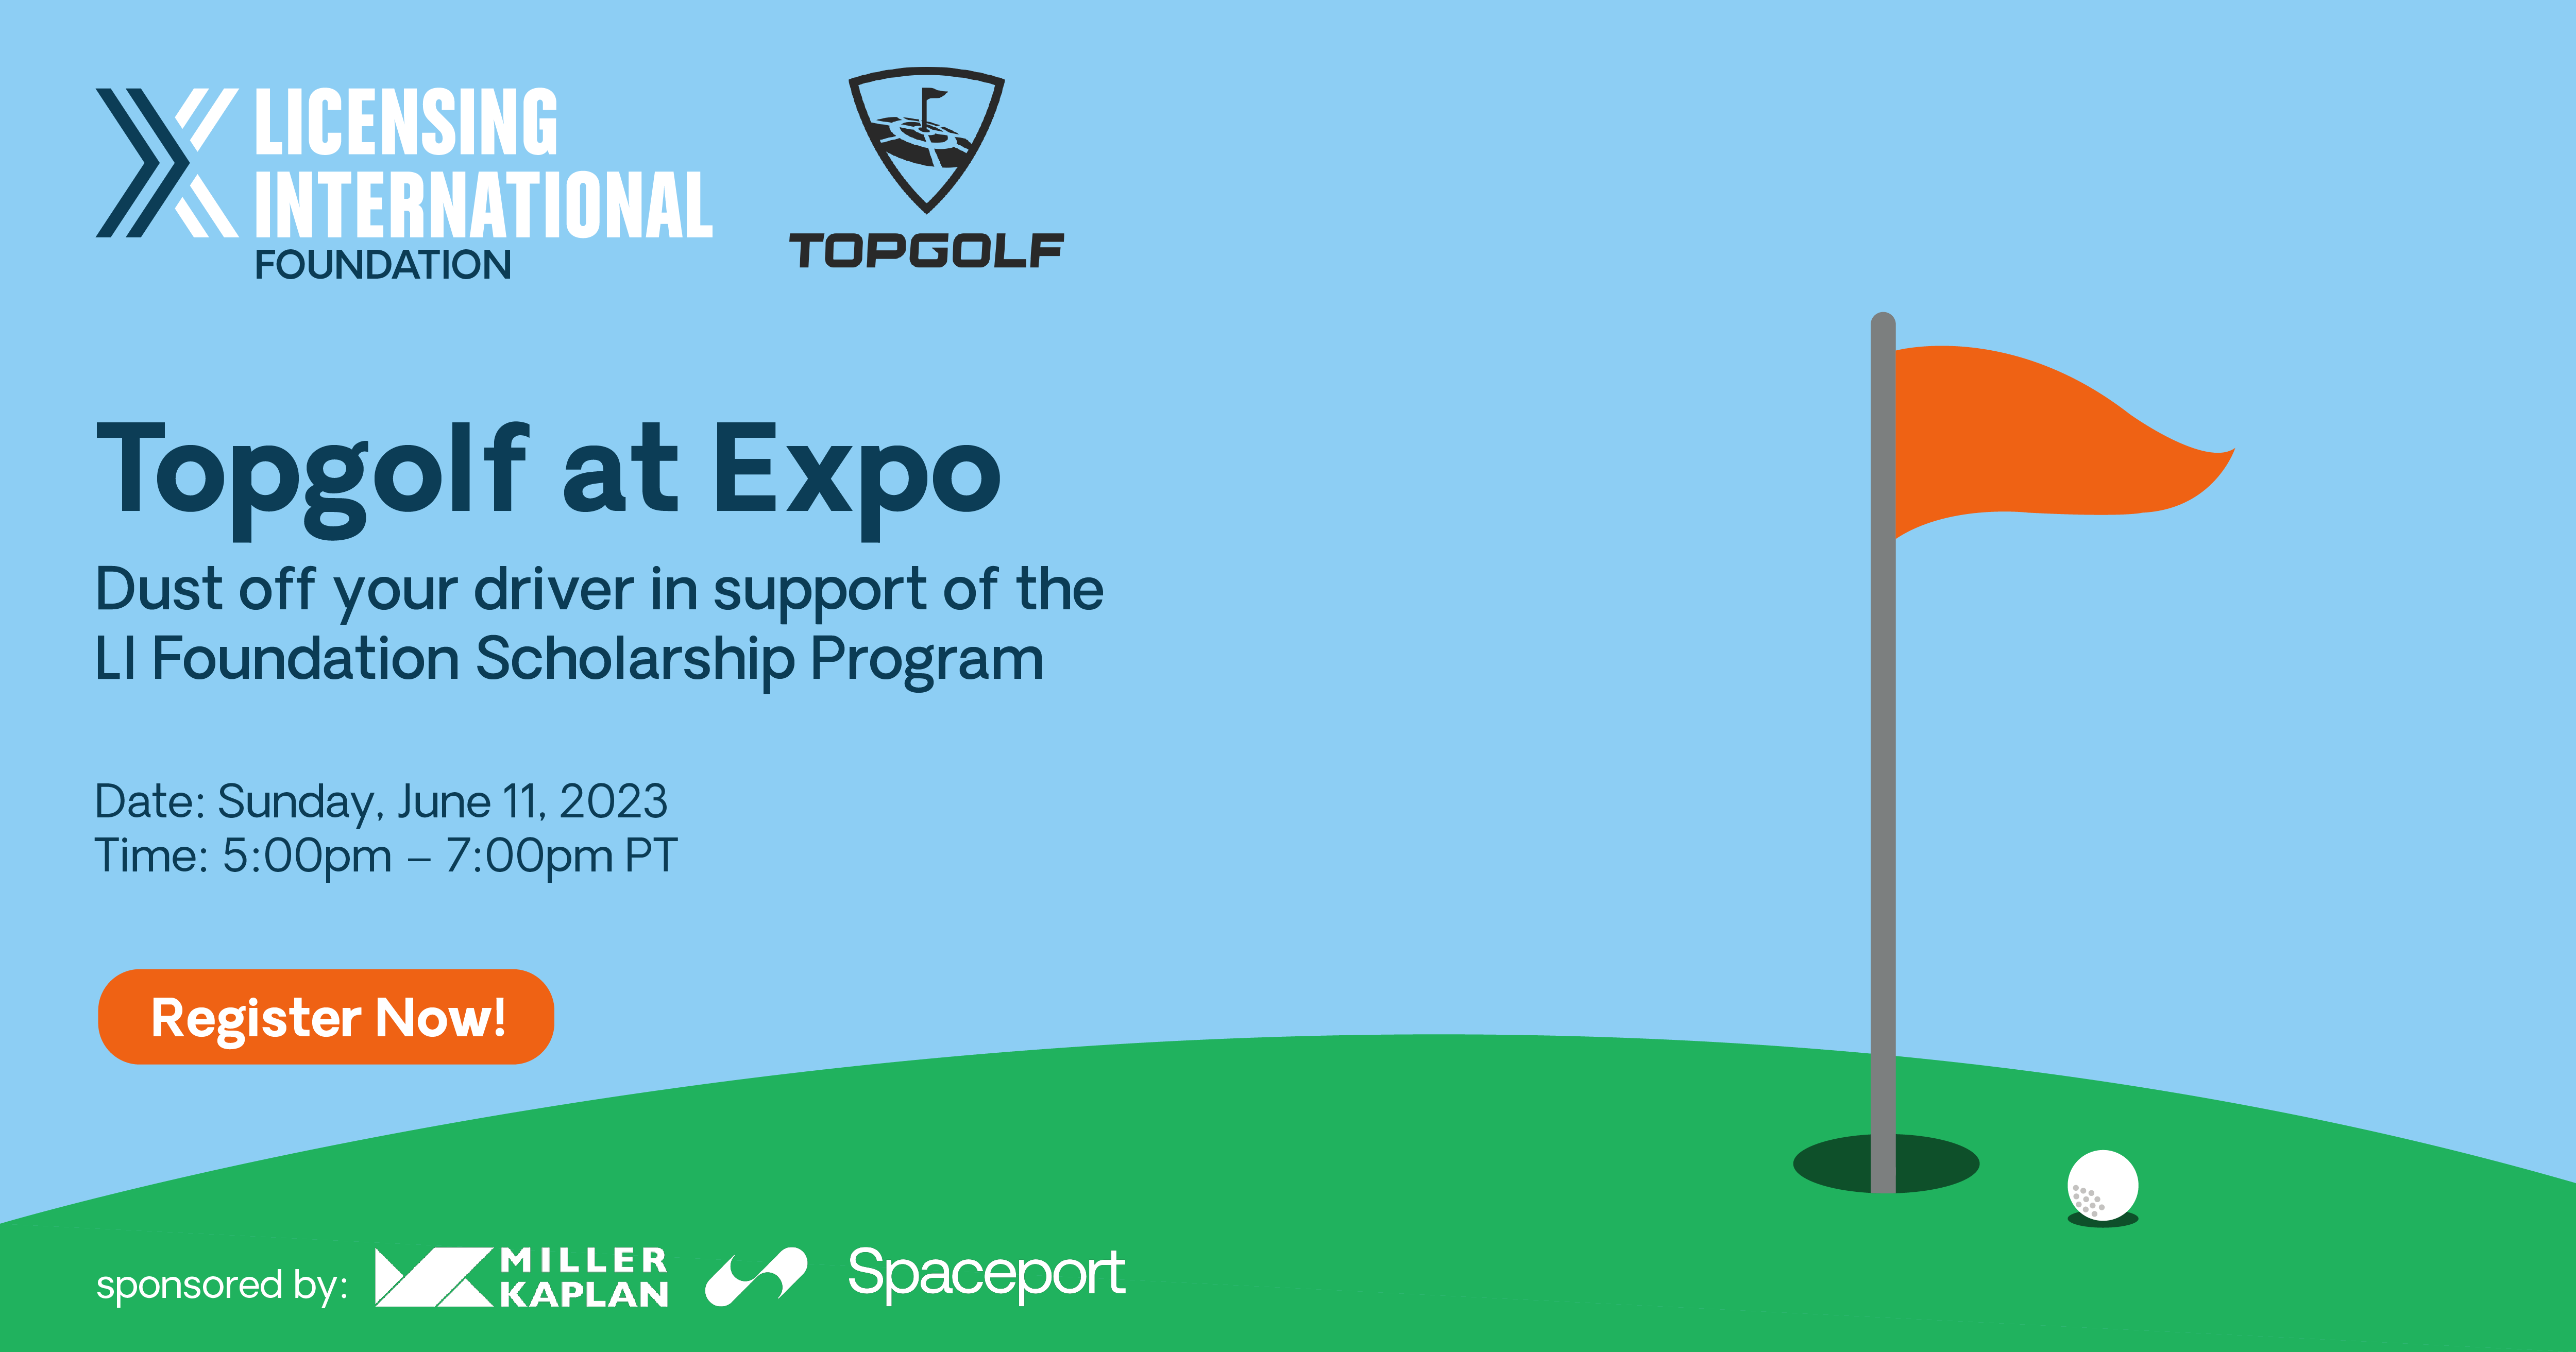 Topgolf at Expo image